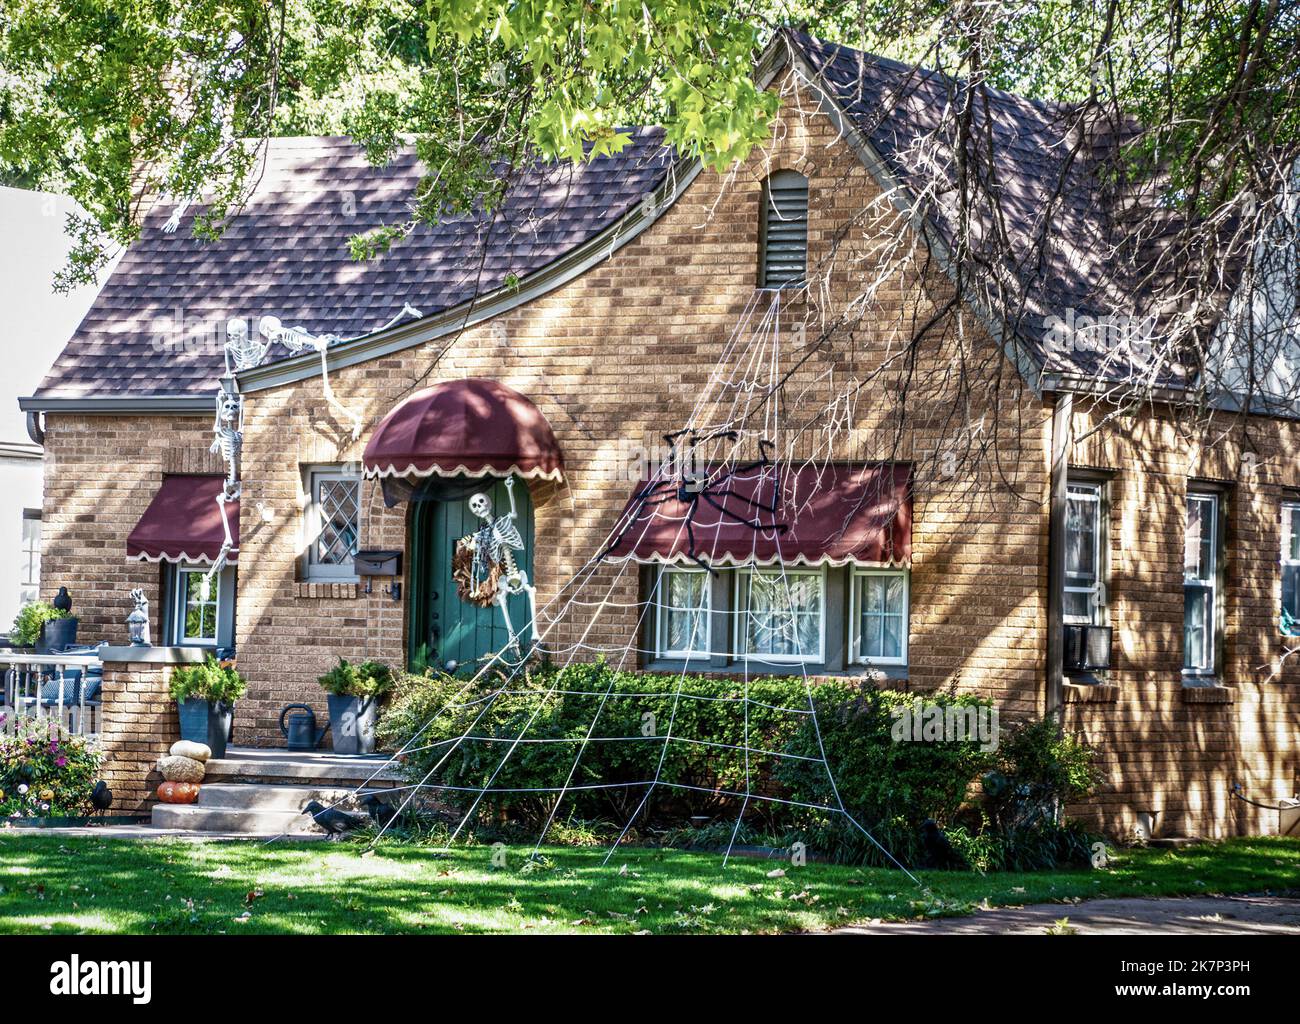 Spooky vintage cottage with awnings is decorated for Halloween with skeletons crawling on roof and huge spider web Stock Photo